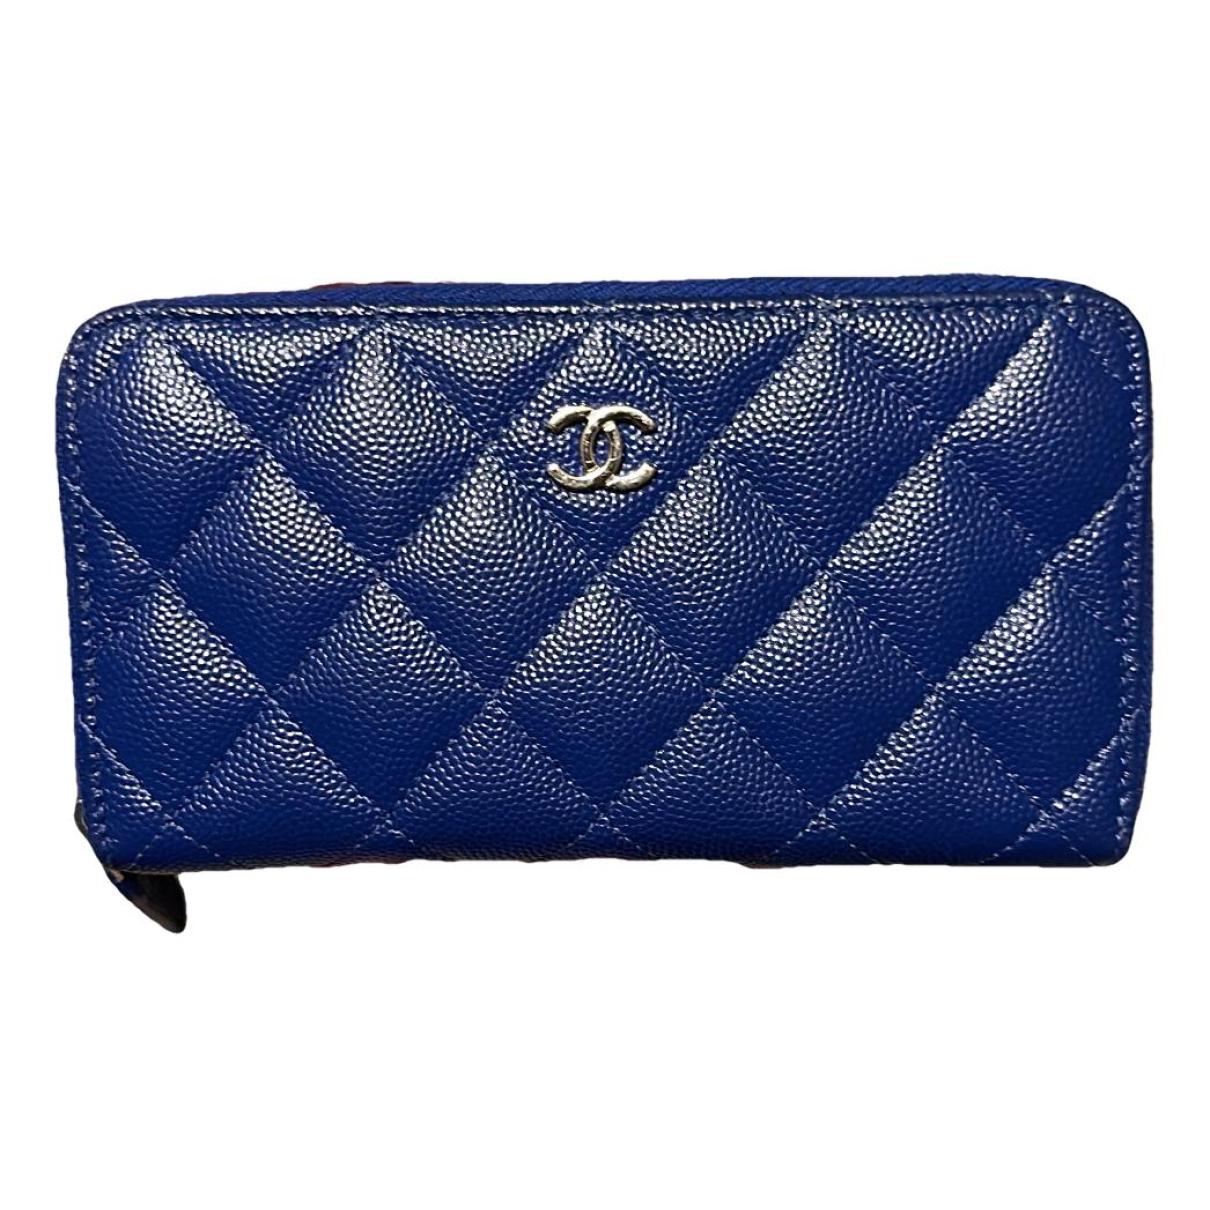 Timeless/classique leather wallet Chanel Turquoise in Leather - 33767511